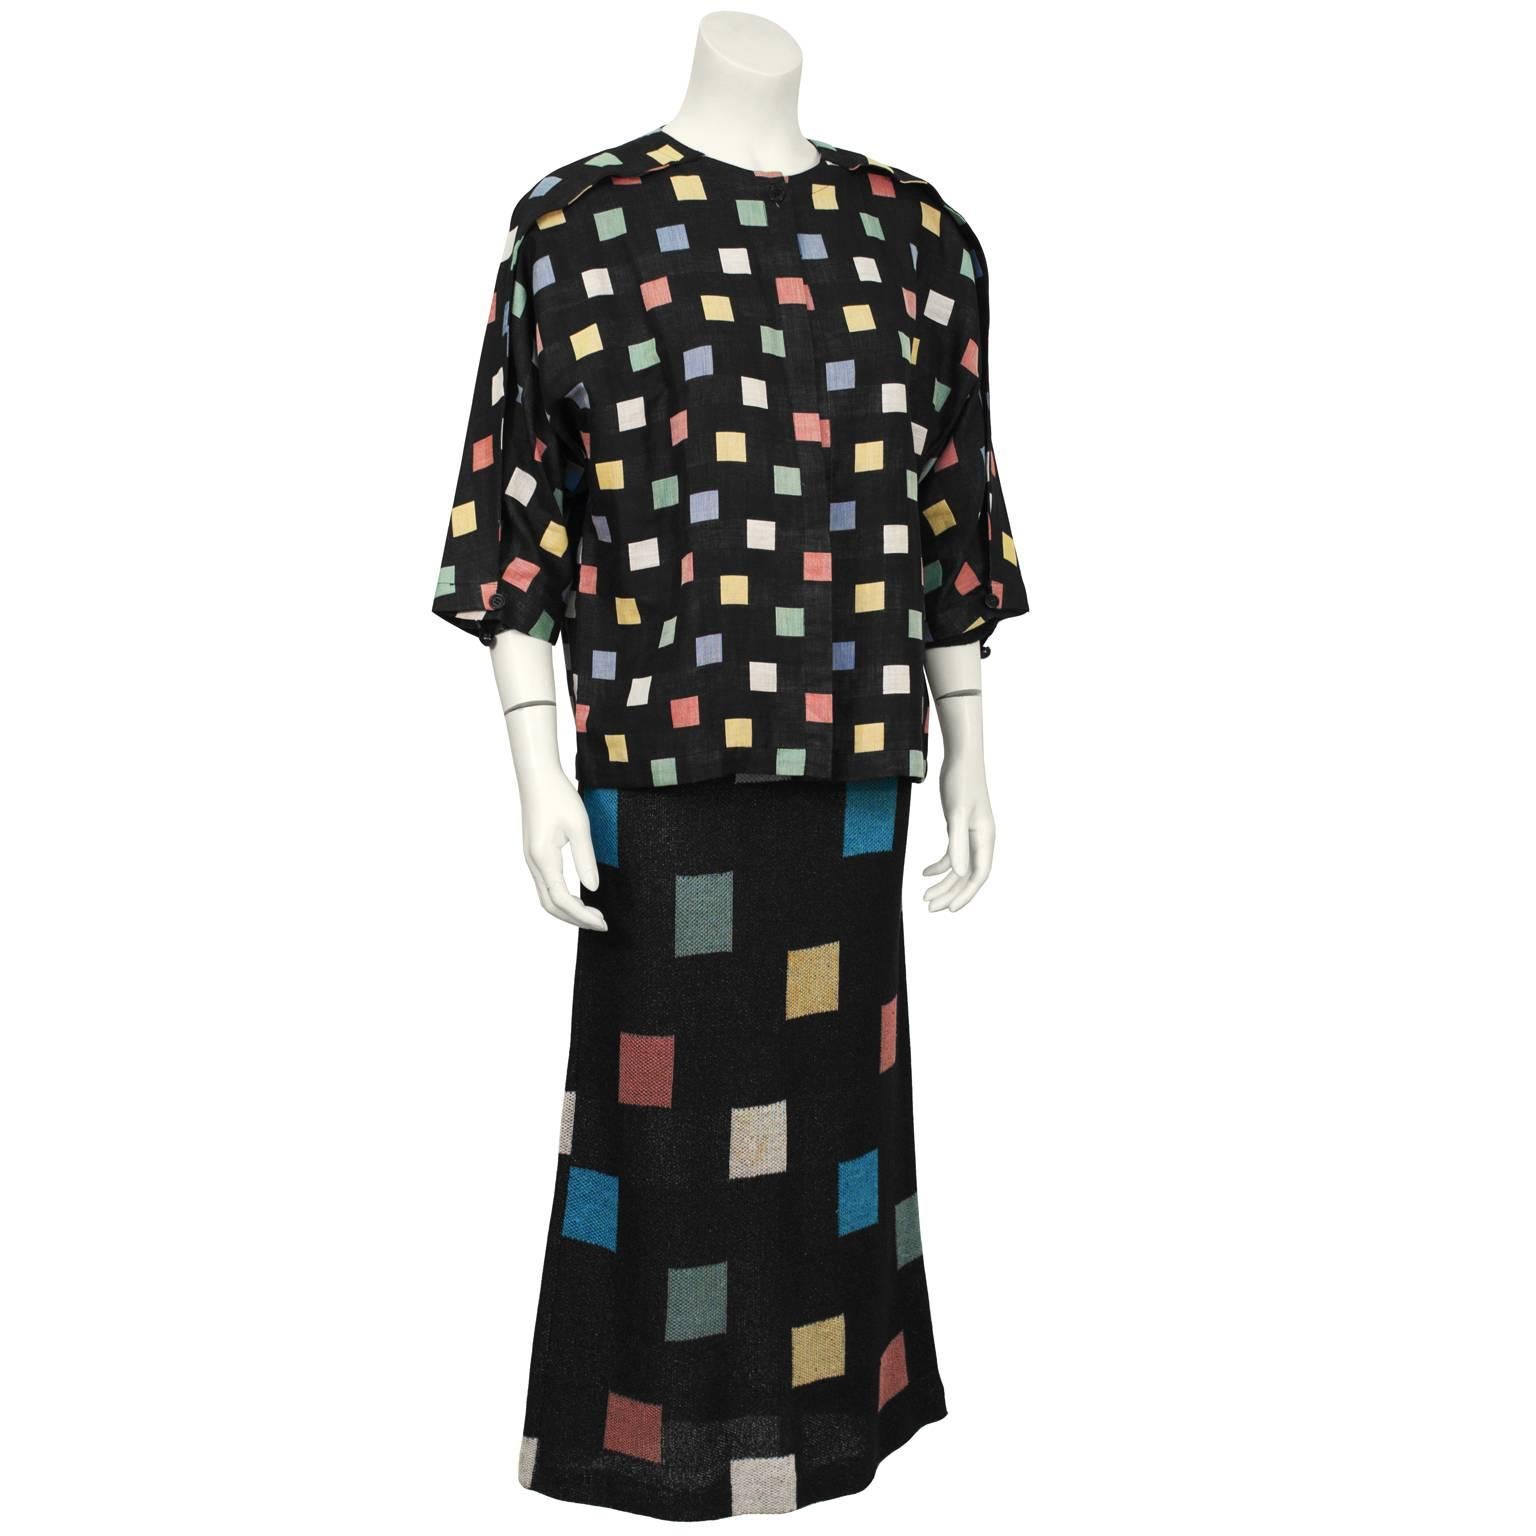 Missoni early 1970’s cotton knit maxi dress and cropped linen jacket ensemble. Both pieces feature an all over multicolored square print on a black background. The linen collarless jacket has an unusual top pleat down the arm that finishes with a